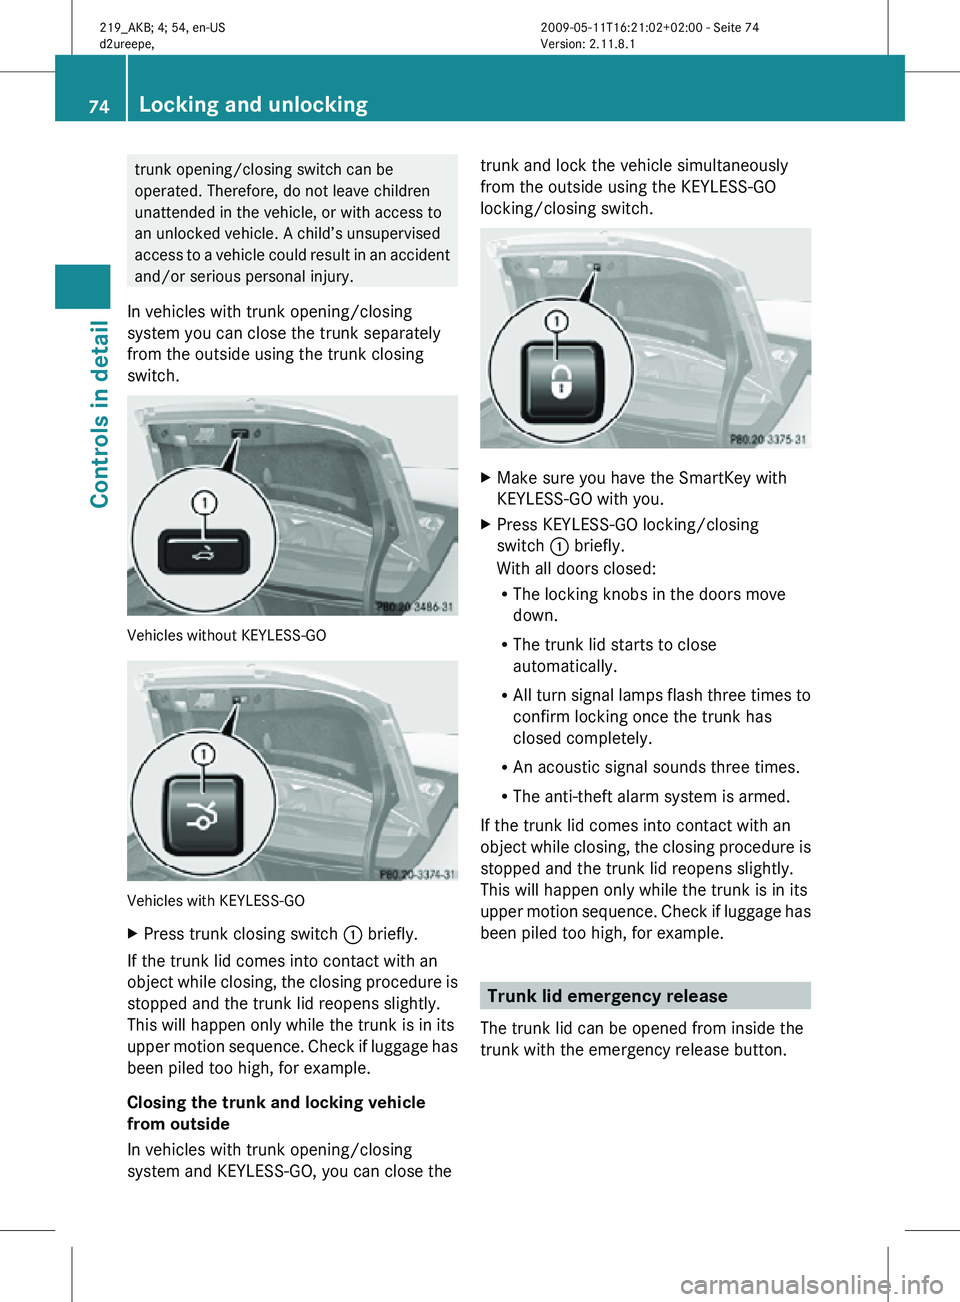 MERCEDES-BENZ CLS 2010  Owners Manual trunk opening/closing switch can be
operated. Therefore, do not leave children
unattended in the vehicle, or with access to
an unlocked vehicle. A child’s unsupervised
access to a vehicle could resu